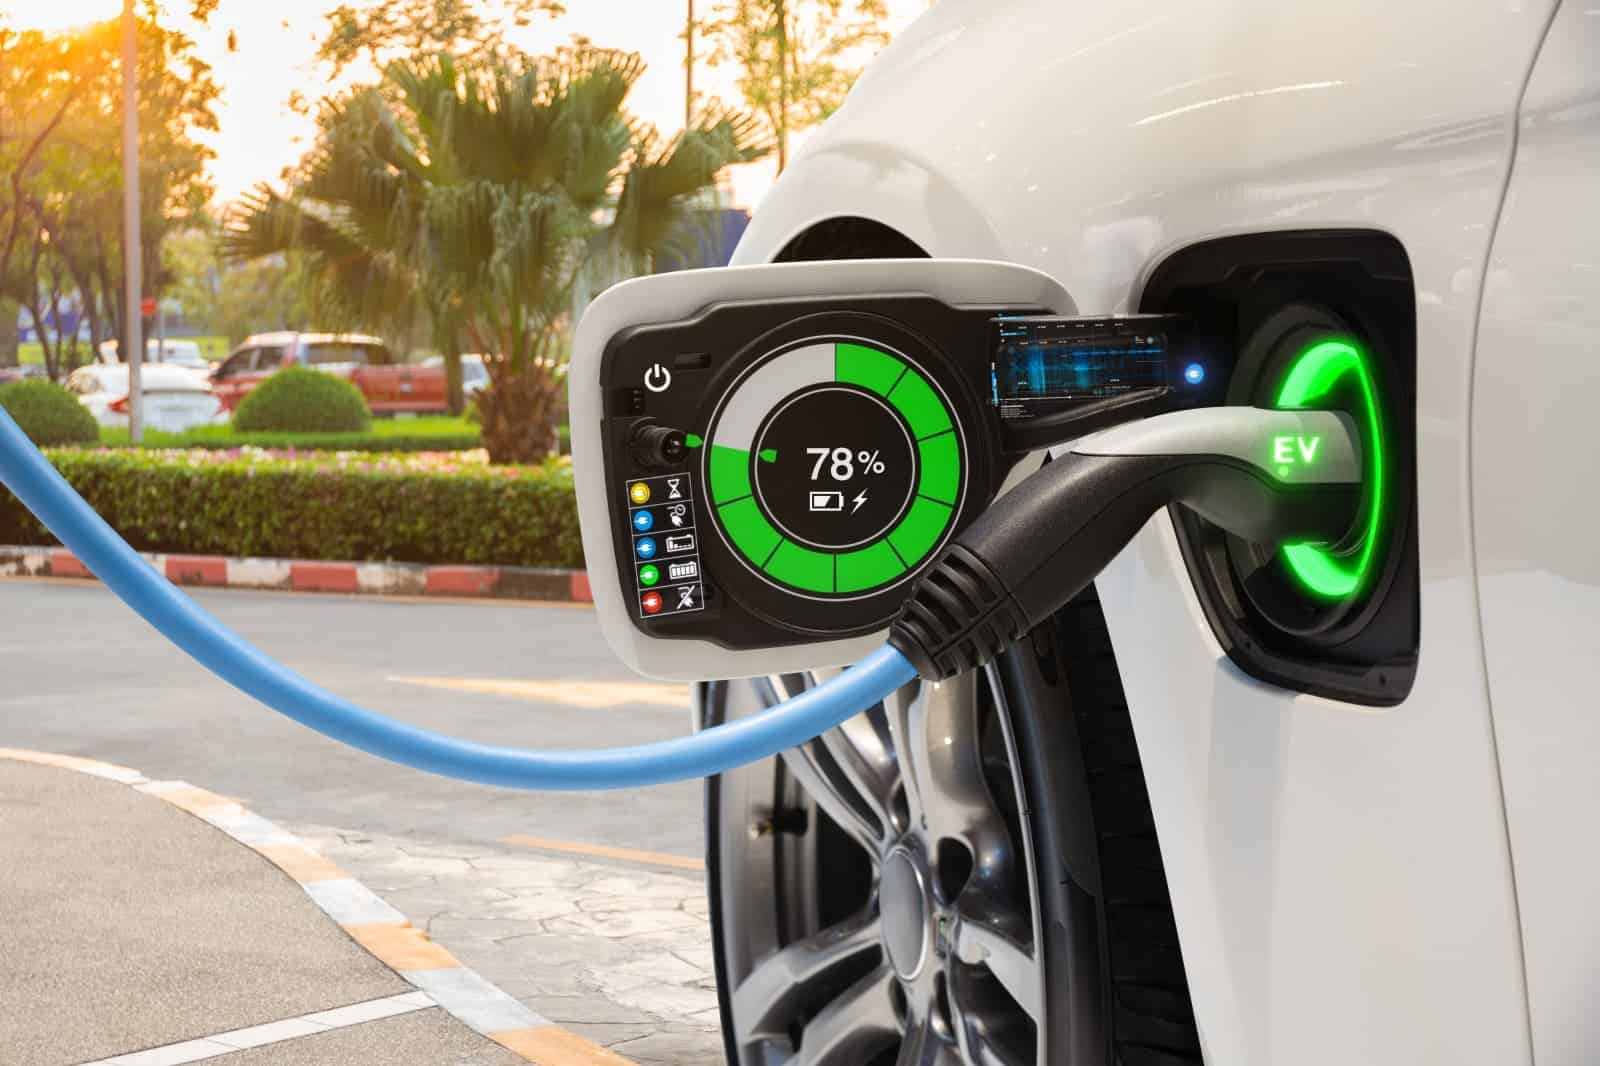 HERE’S WHY DRIVING AN ELECTRIC CAR IS CHEAPER COMPARED TO PETROL CARS